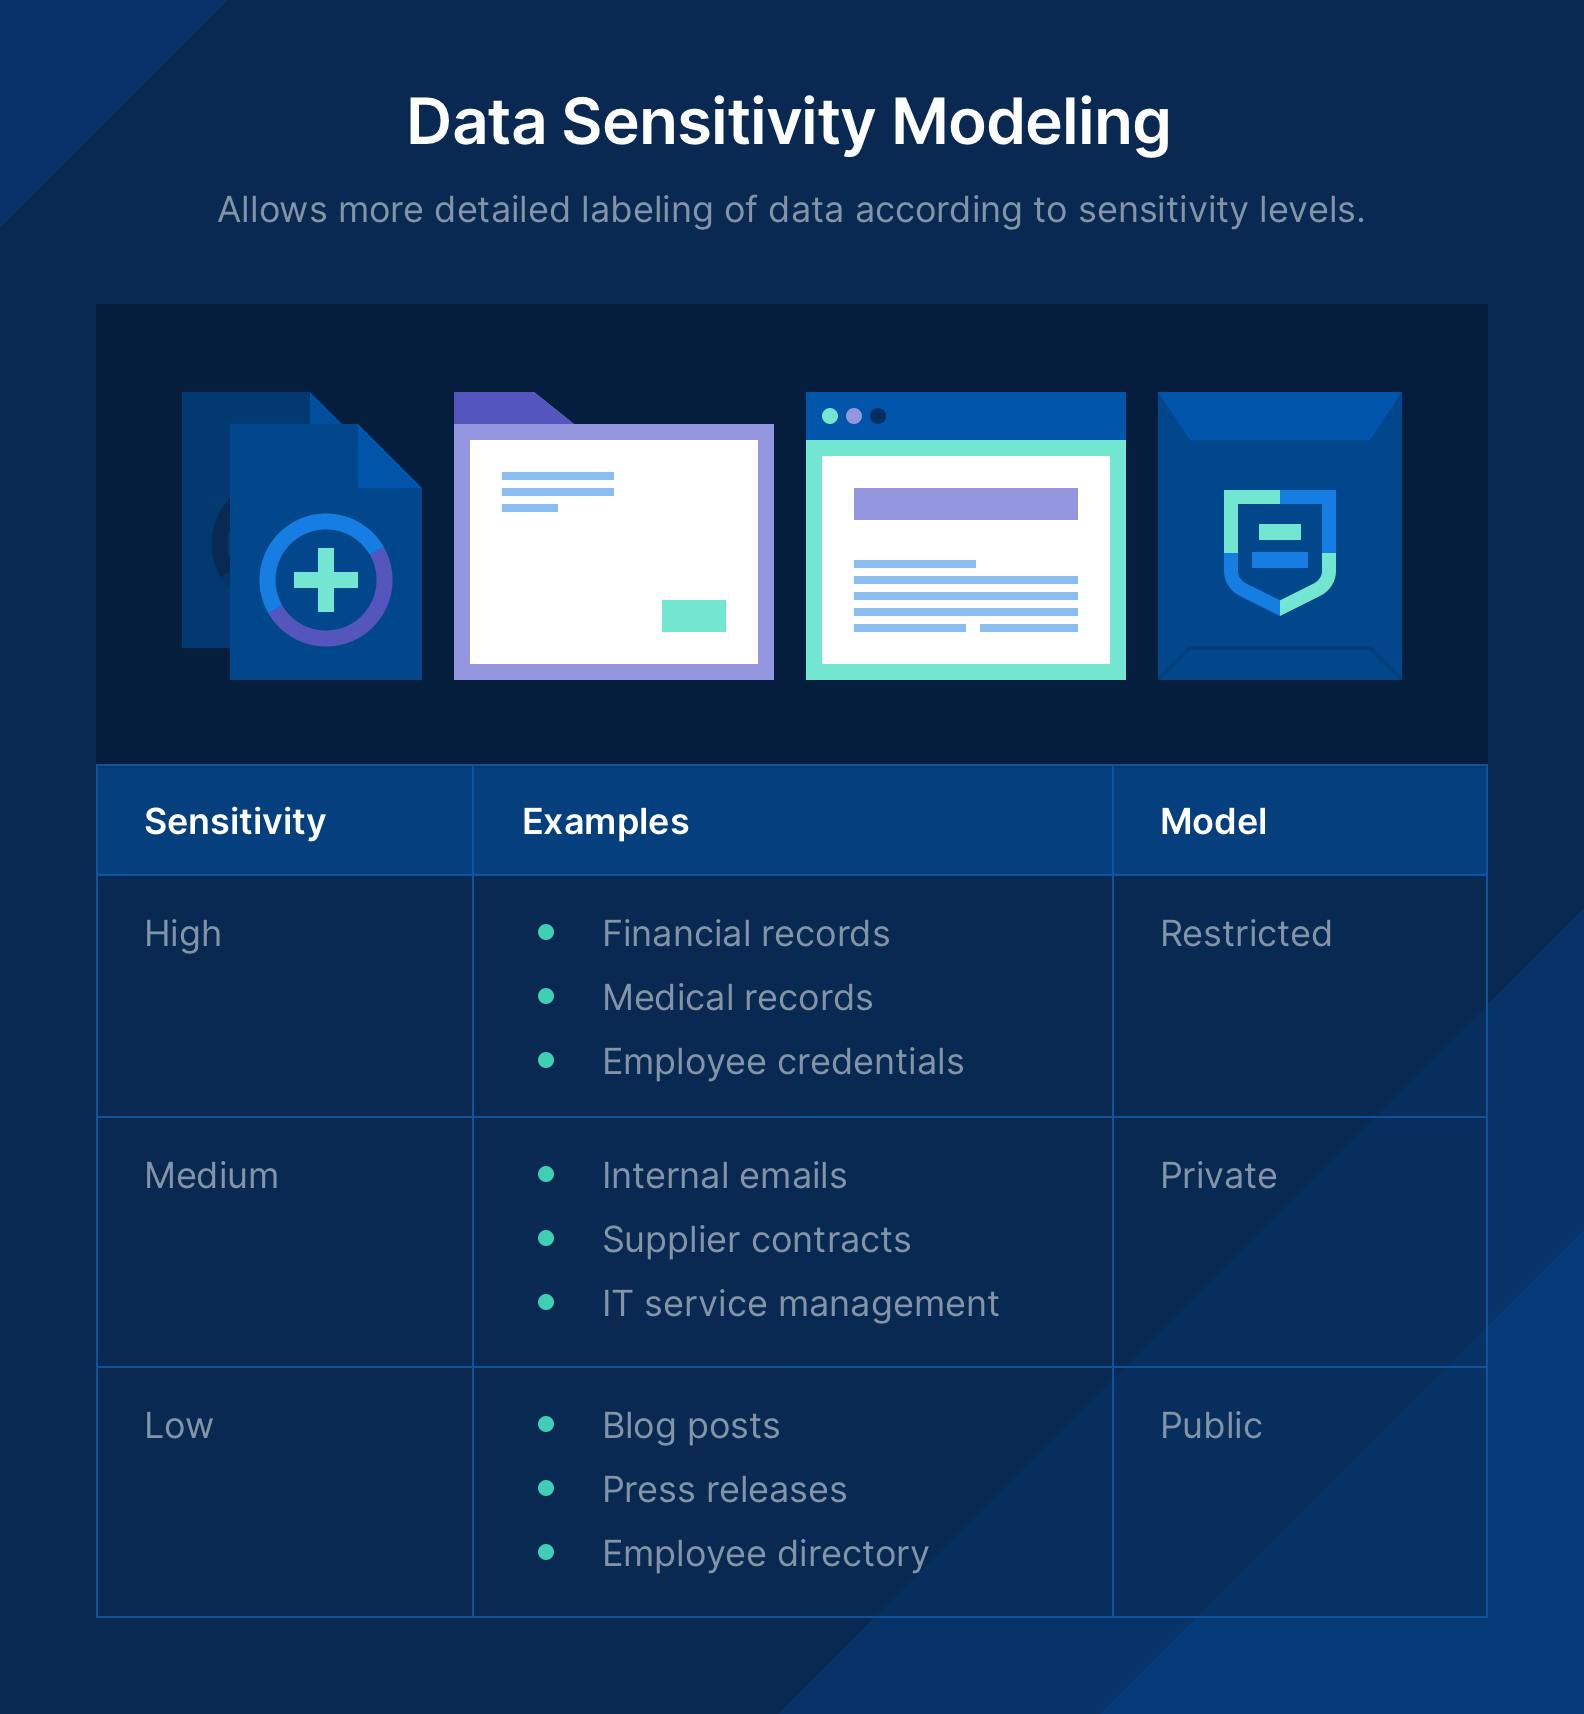 Data sensitivity modeling table showing three levels of sensitivity with examples for each